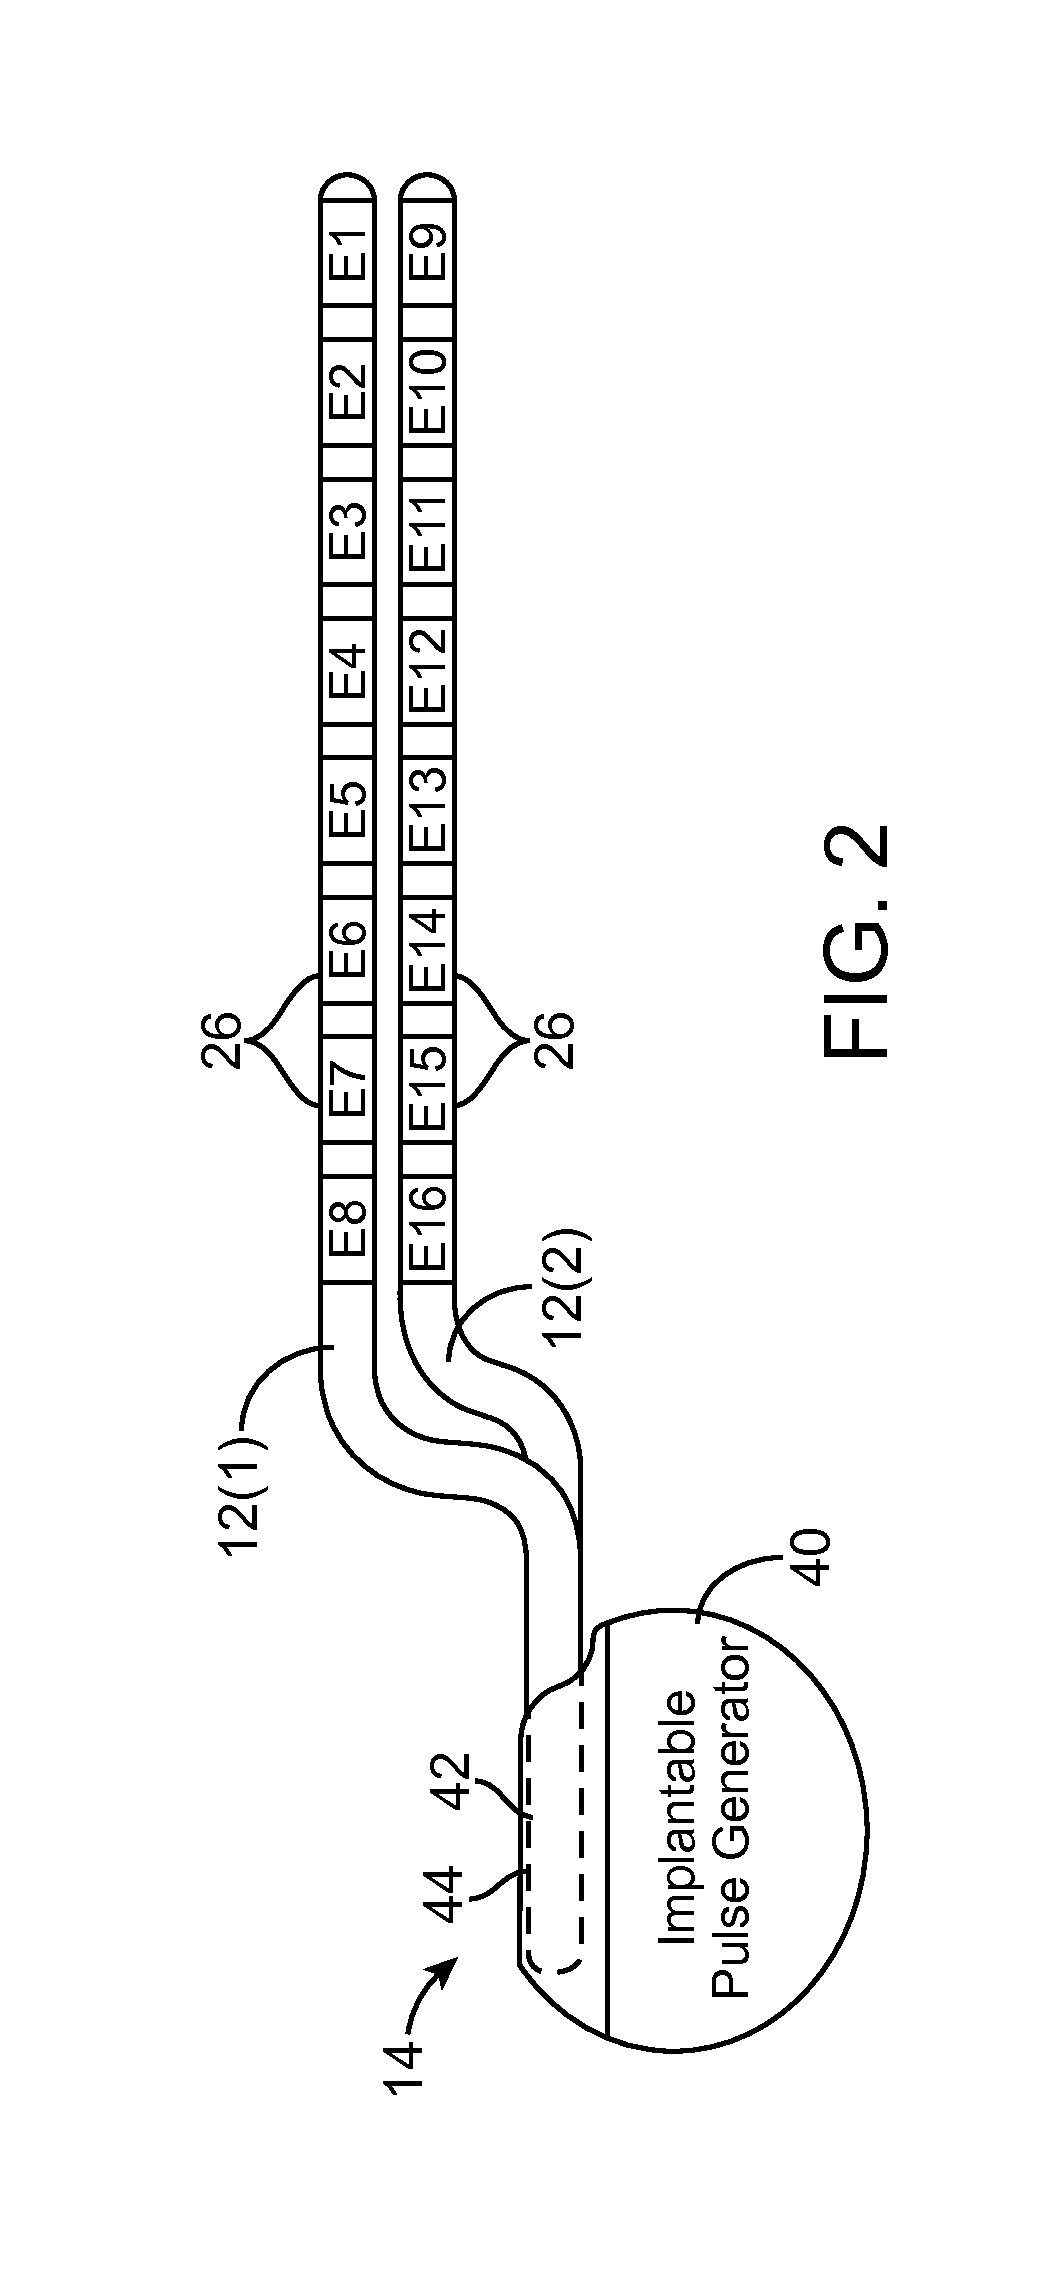 System and method for storing application specific and lead configuration information in neurostimulation device